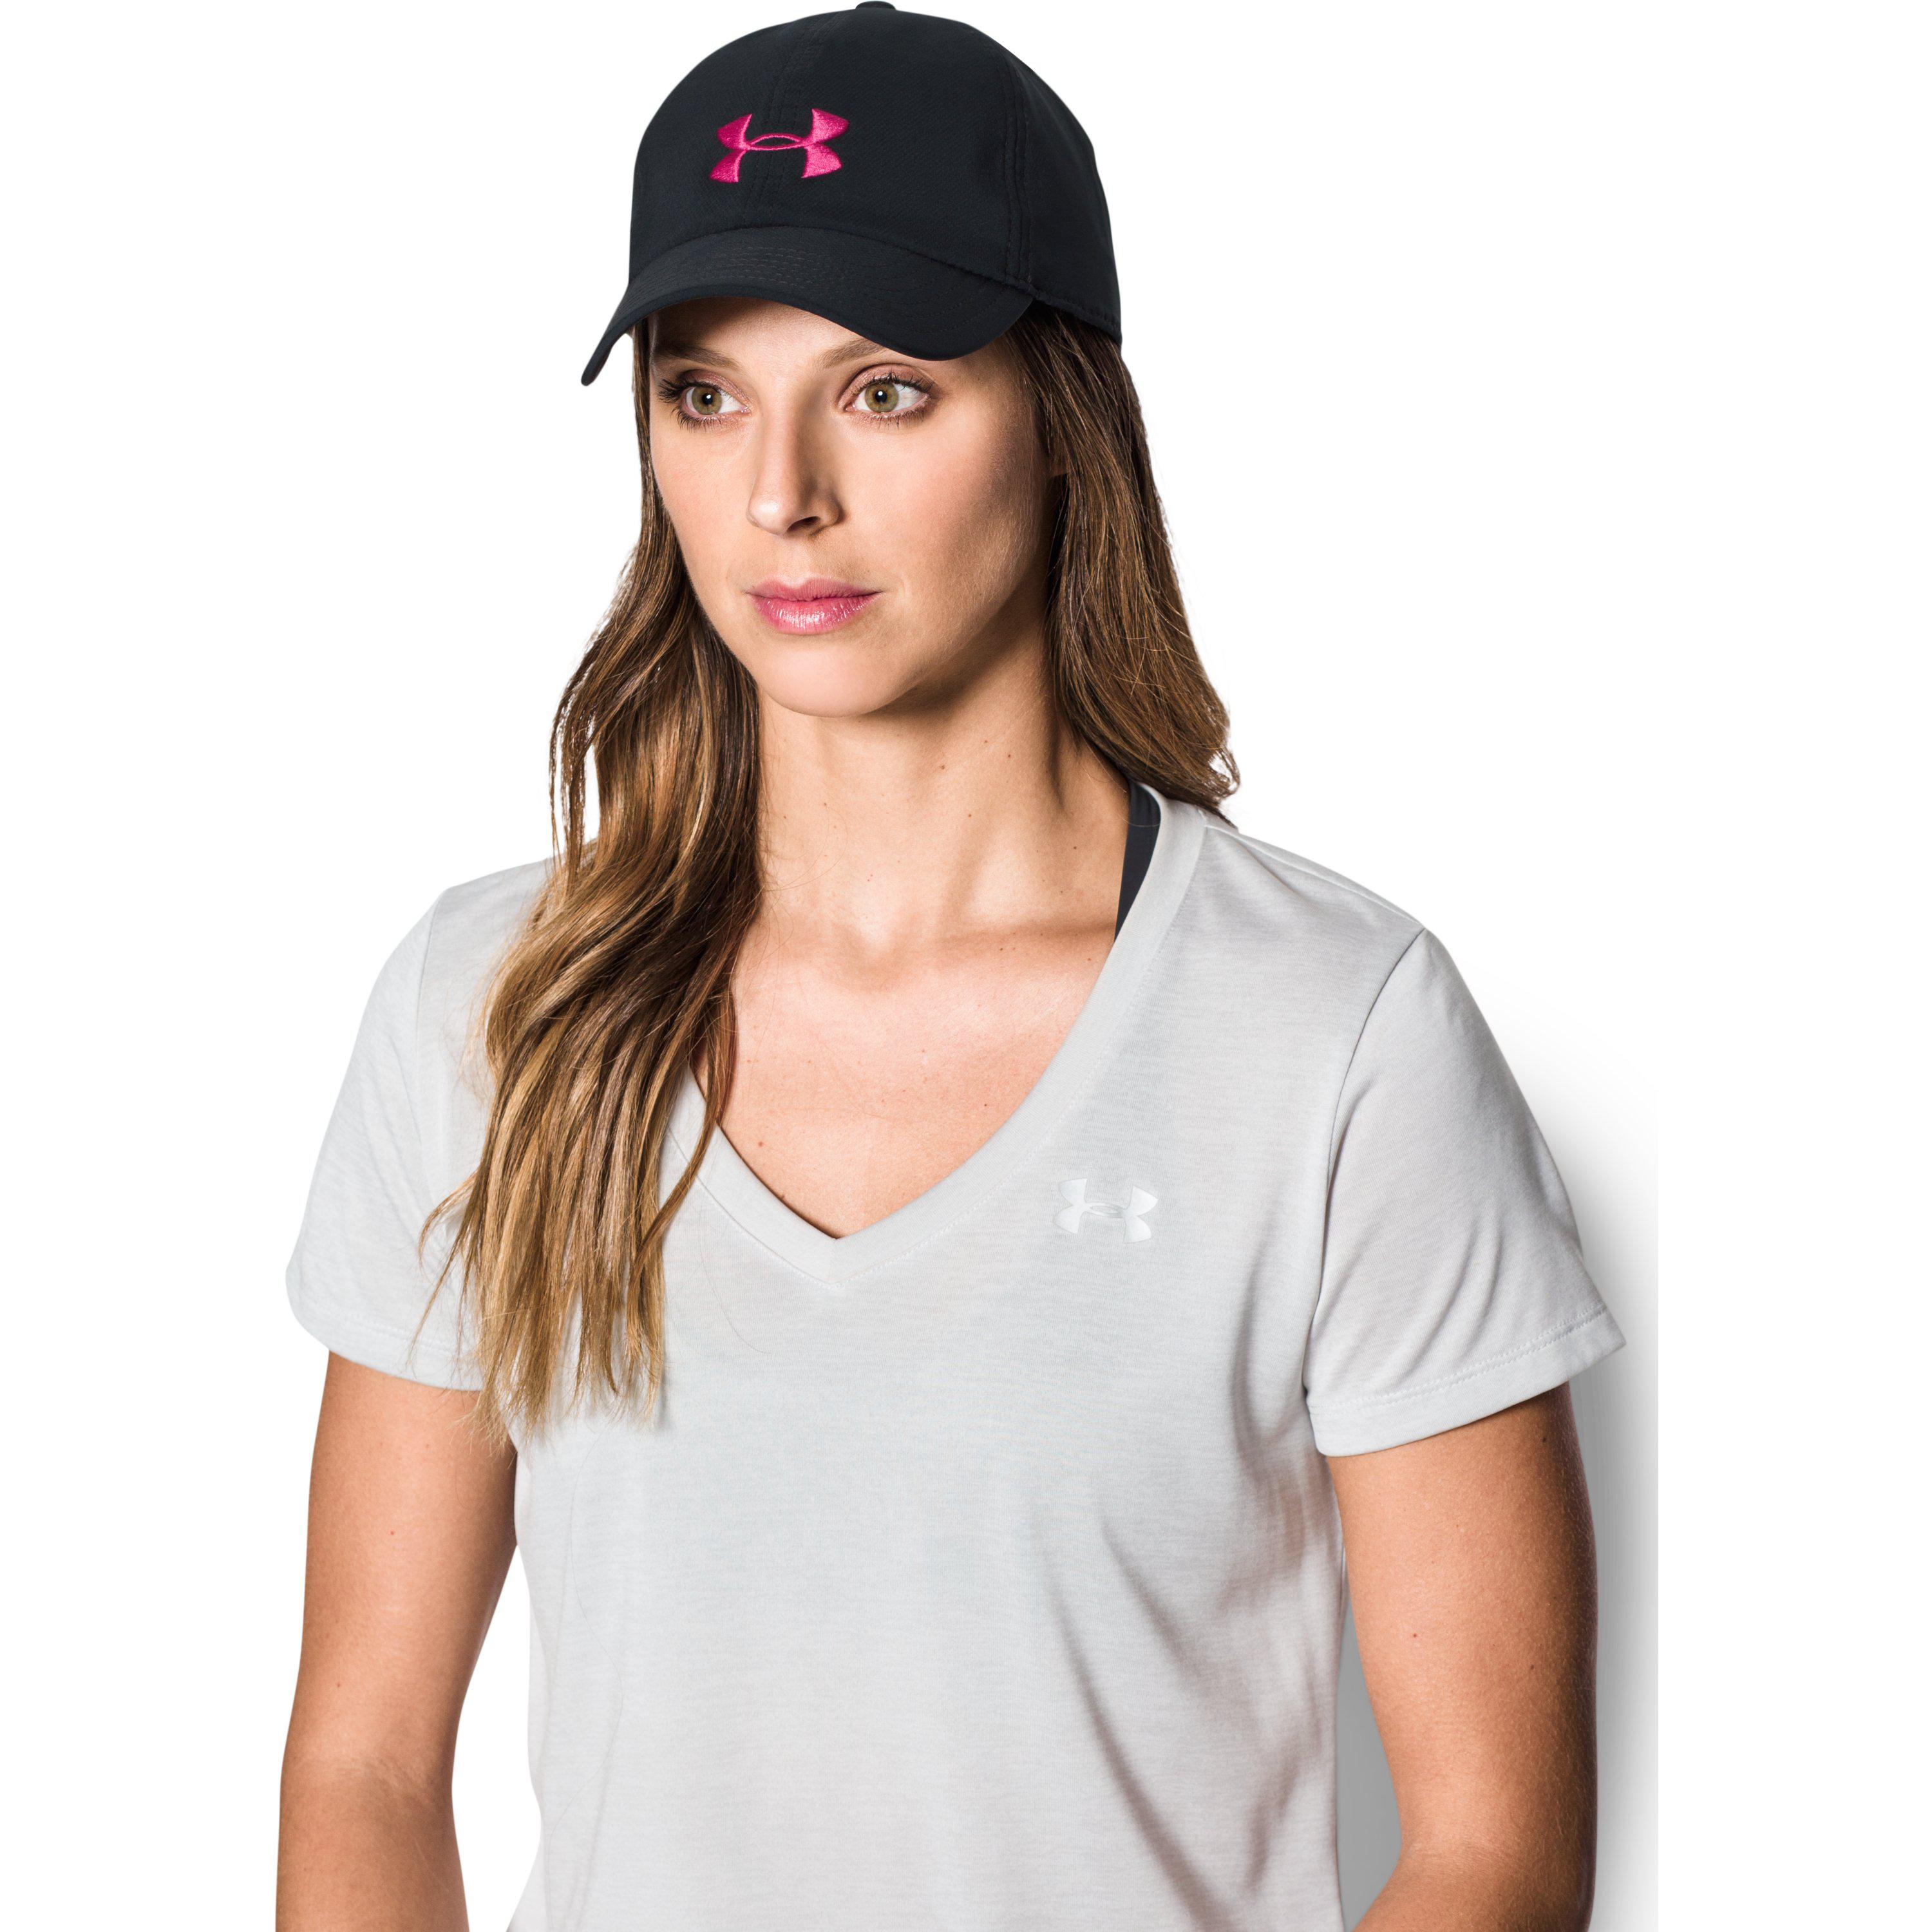 women's ua microthread twist renegade cap for Sale,Up To OFF 72%